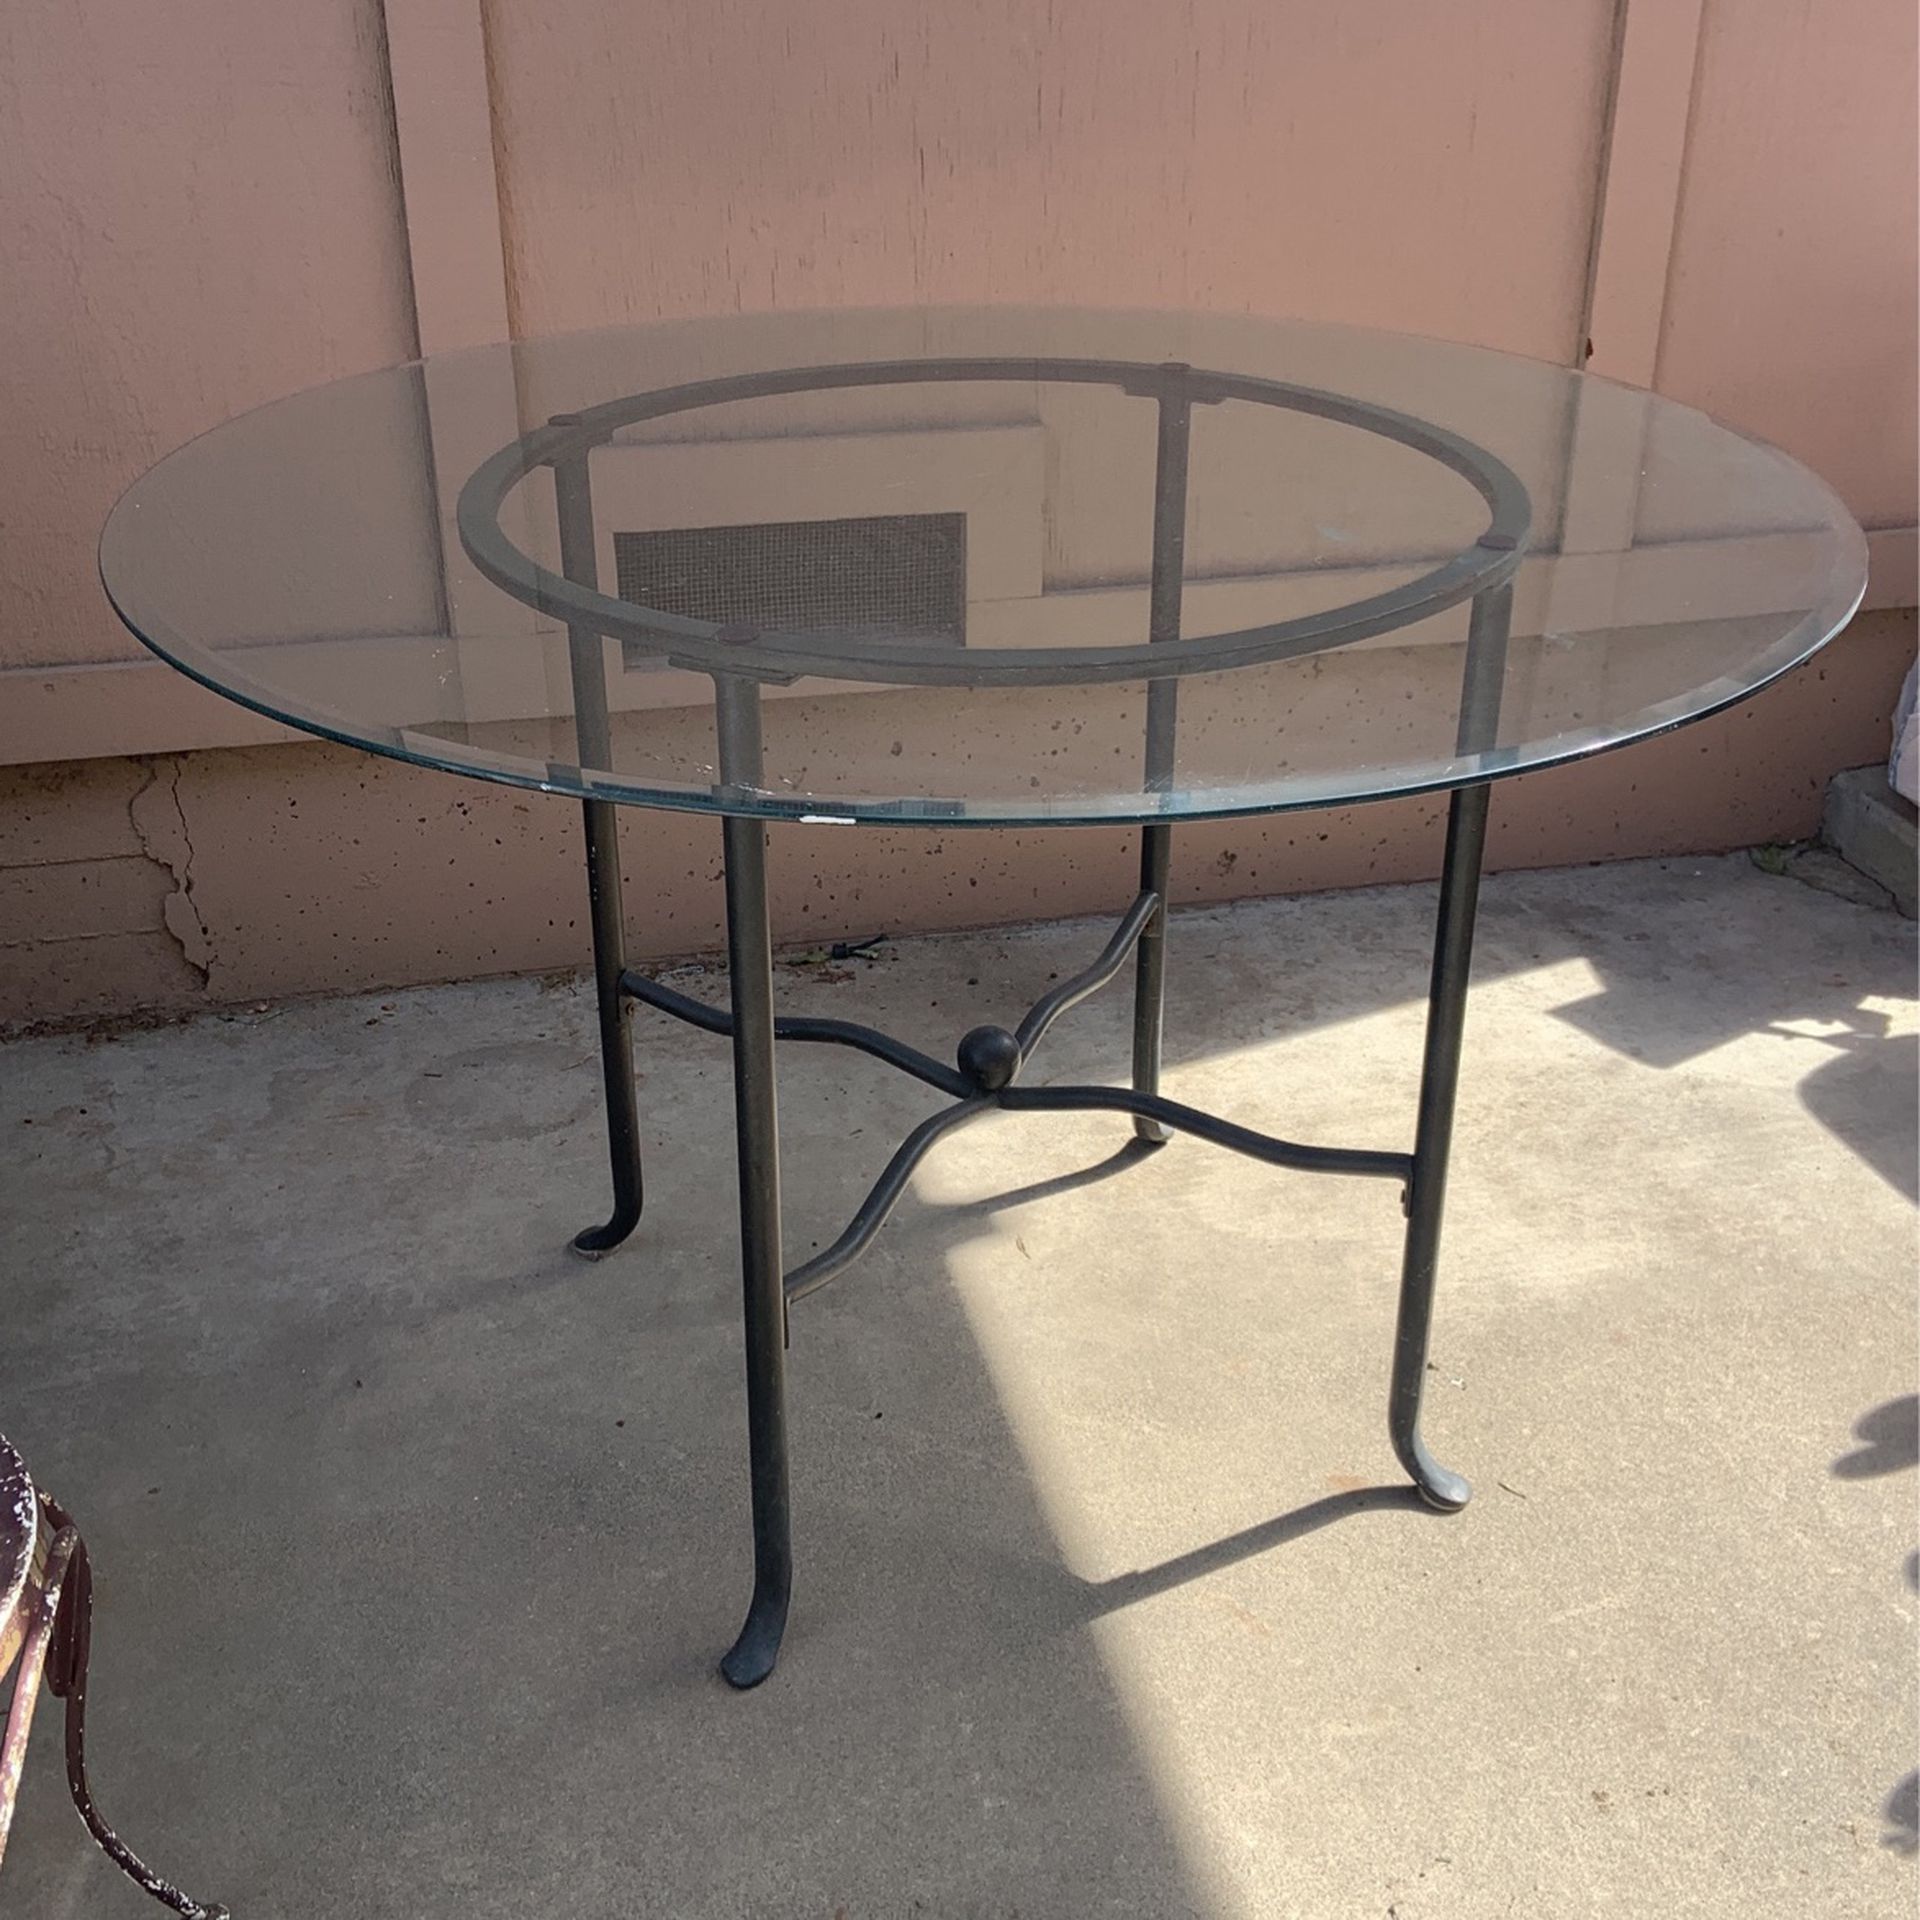 FREE GLASS TABLE